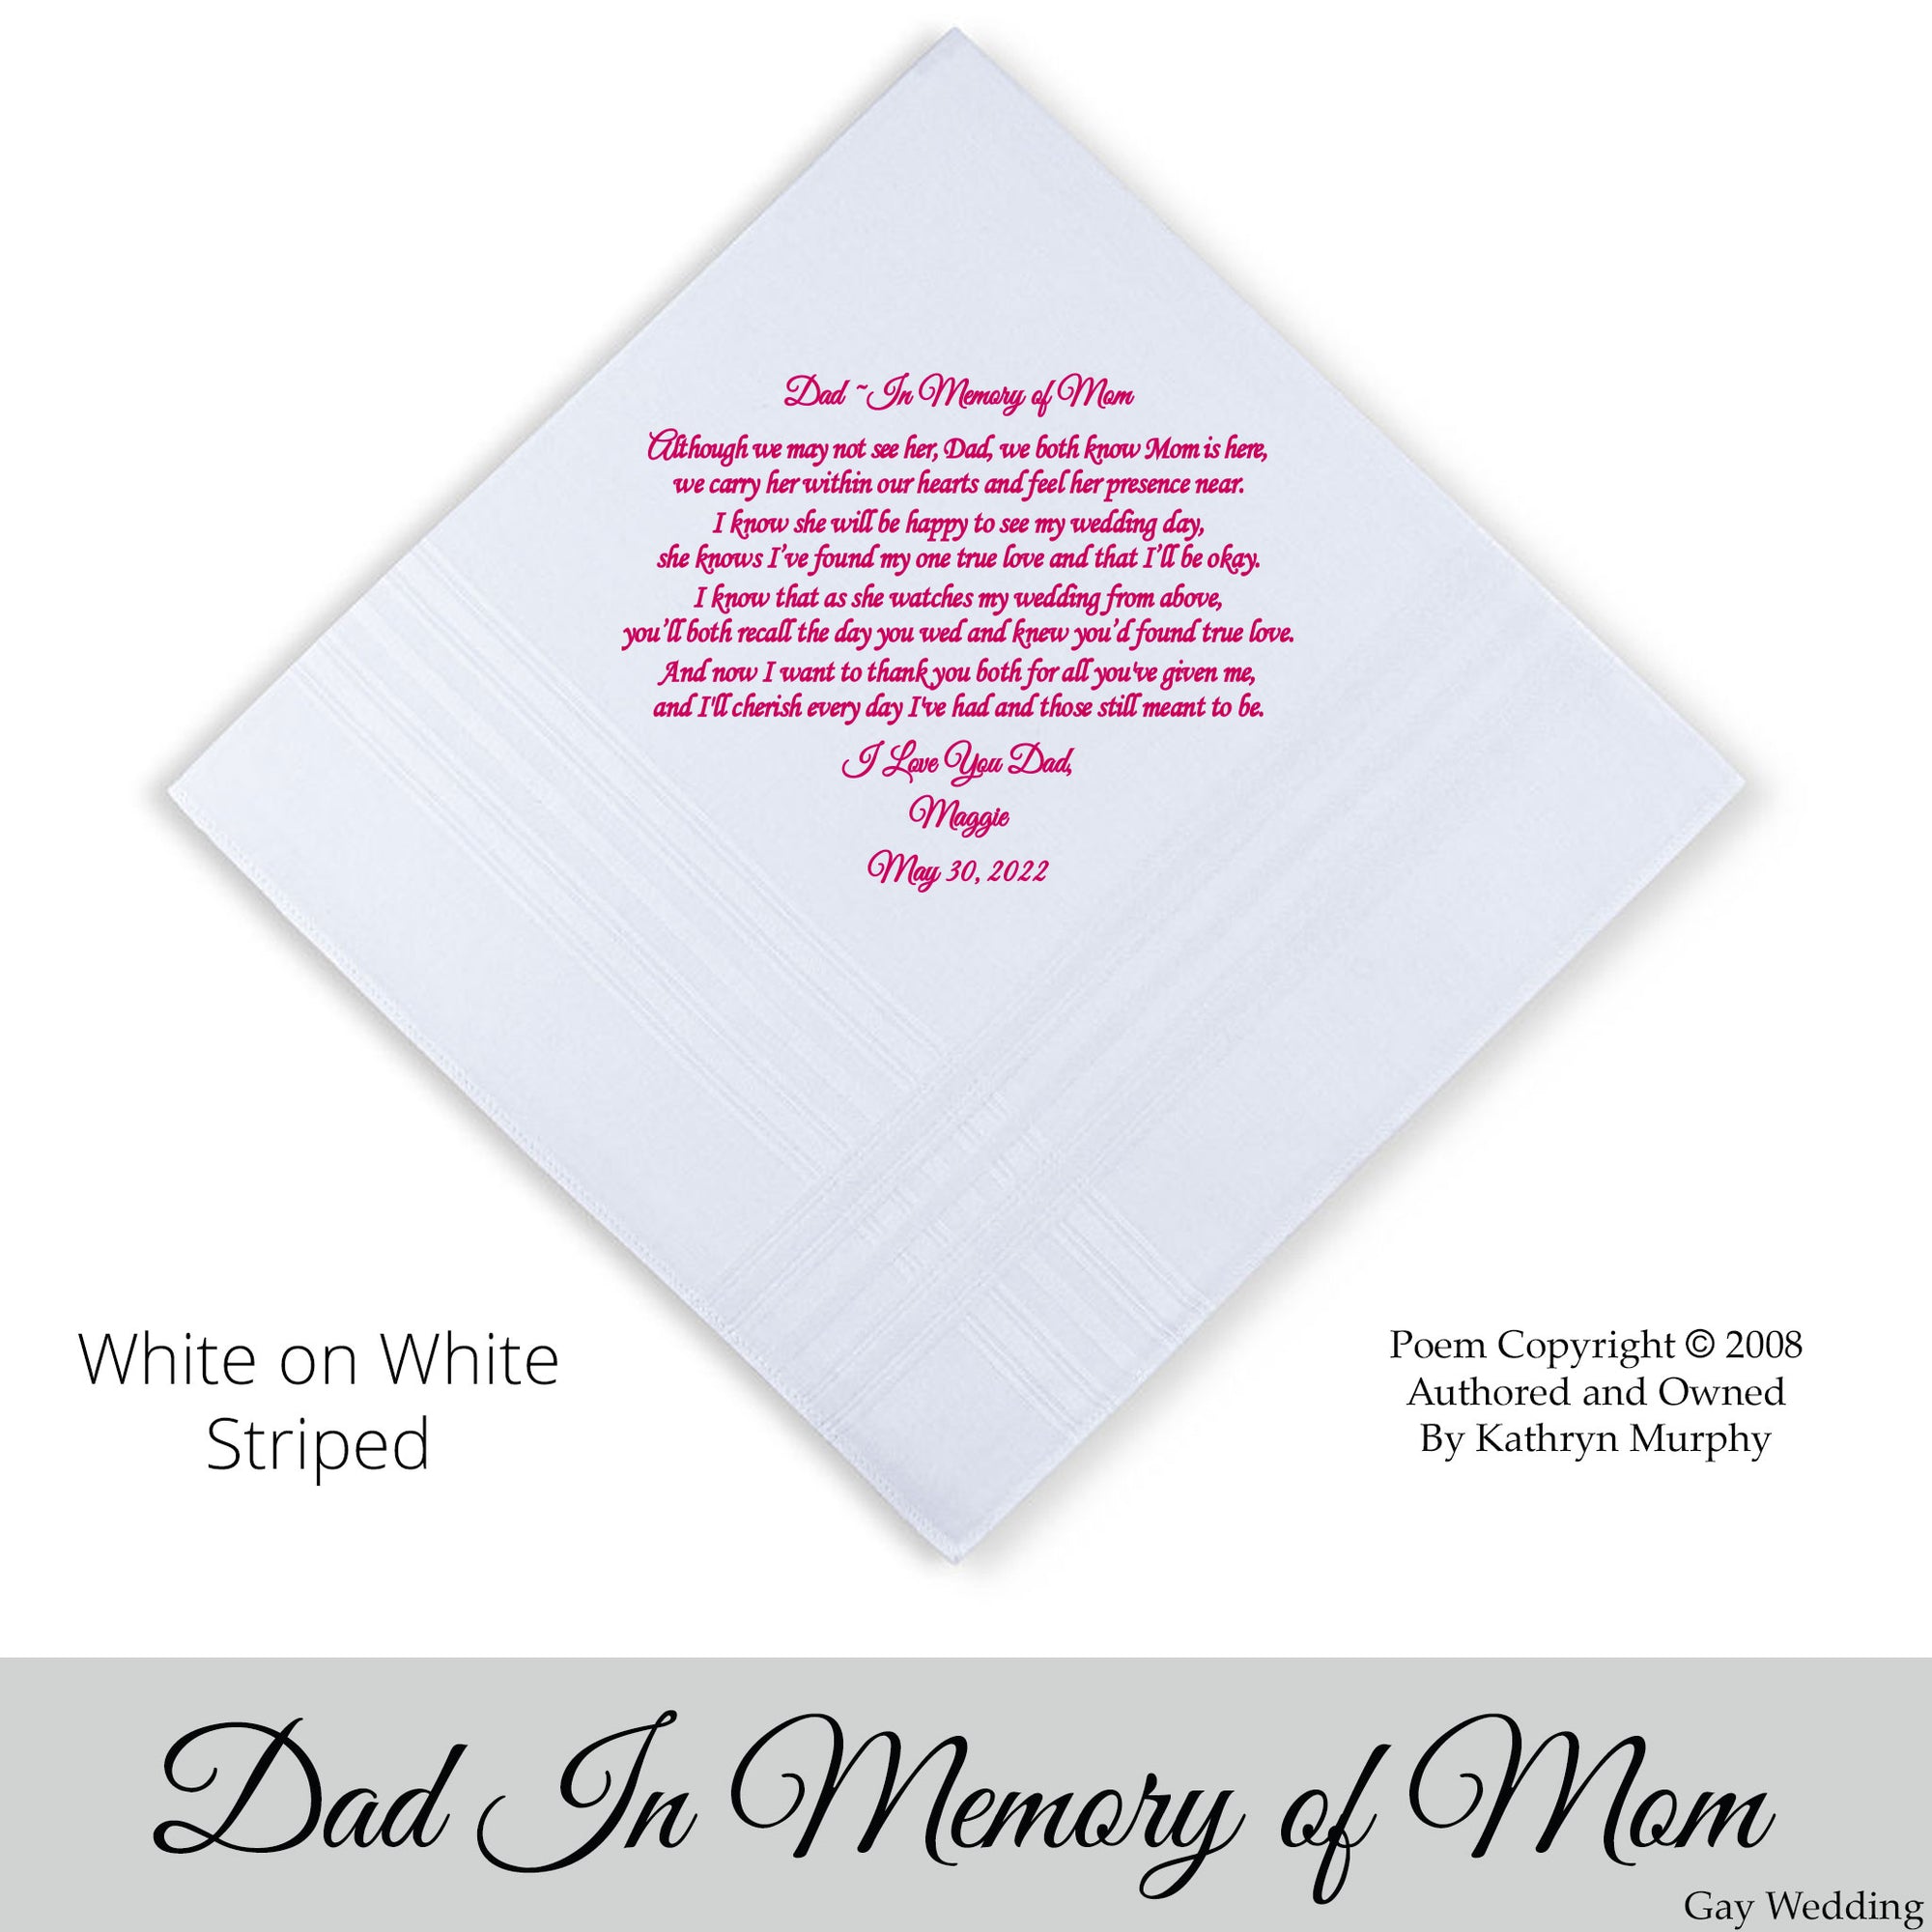 Gay Wedding Gift for the father of the bride poem printed wedding hankie